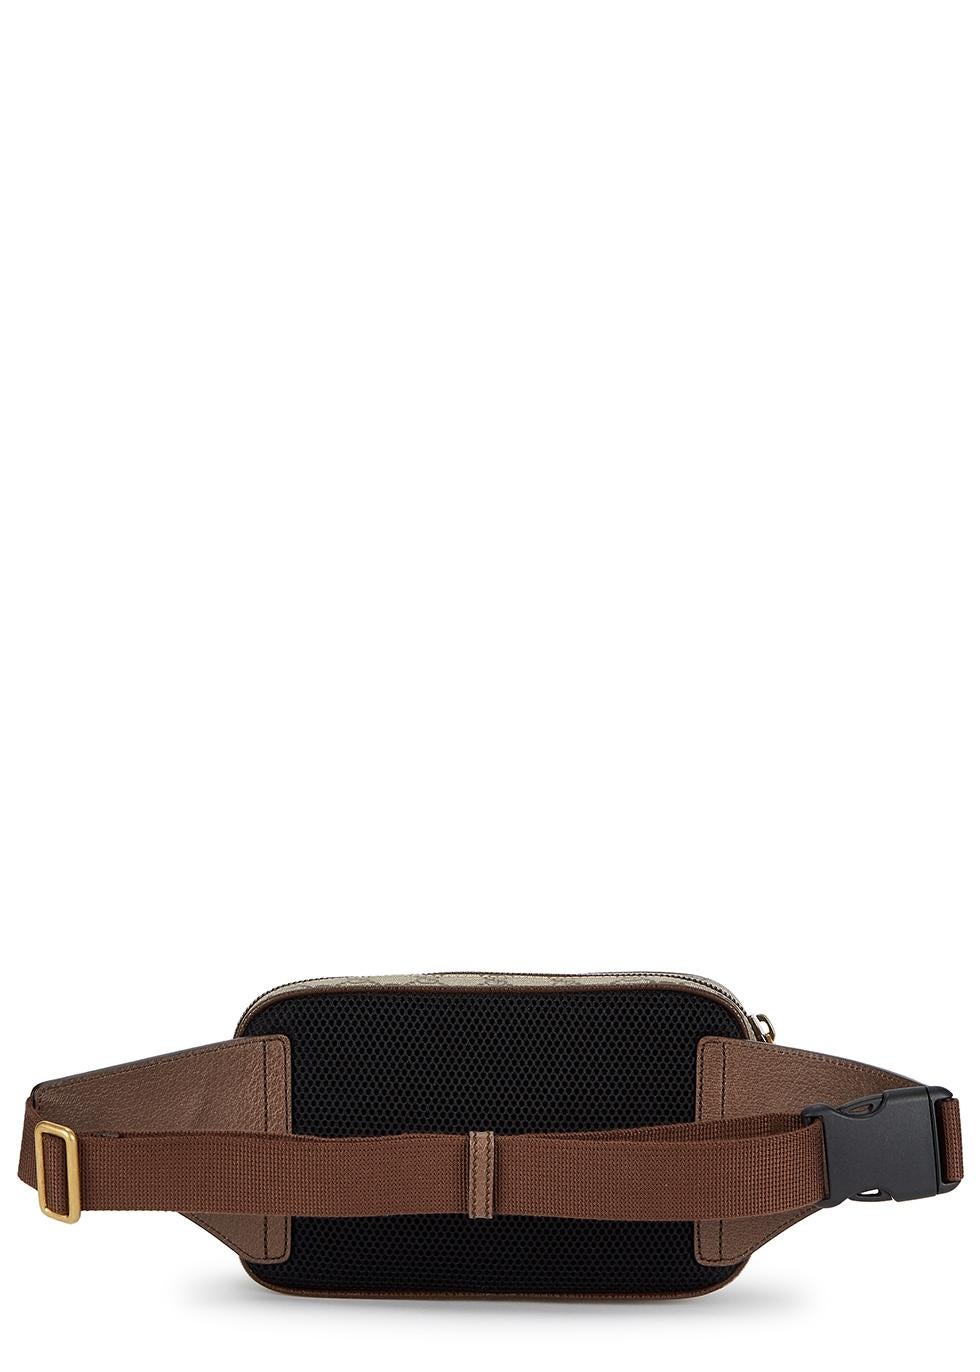 Gucci Ophidia GG Monogram Leather Belt Bag

- Beige/ebony soft GG 
- Supreme with brown leather trim
- Green and red Web
Antique gold-toned hardware Double G
- Mesh back
- Front zipper pocket
- Interior zip pocket and open pockets
- Adjustable nylon